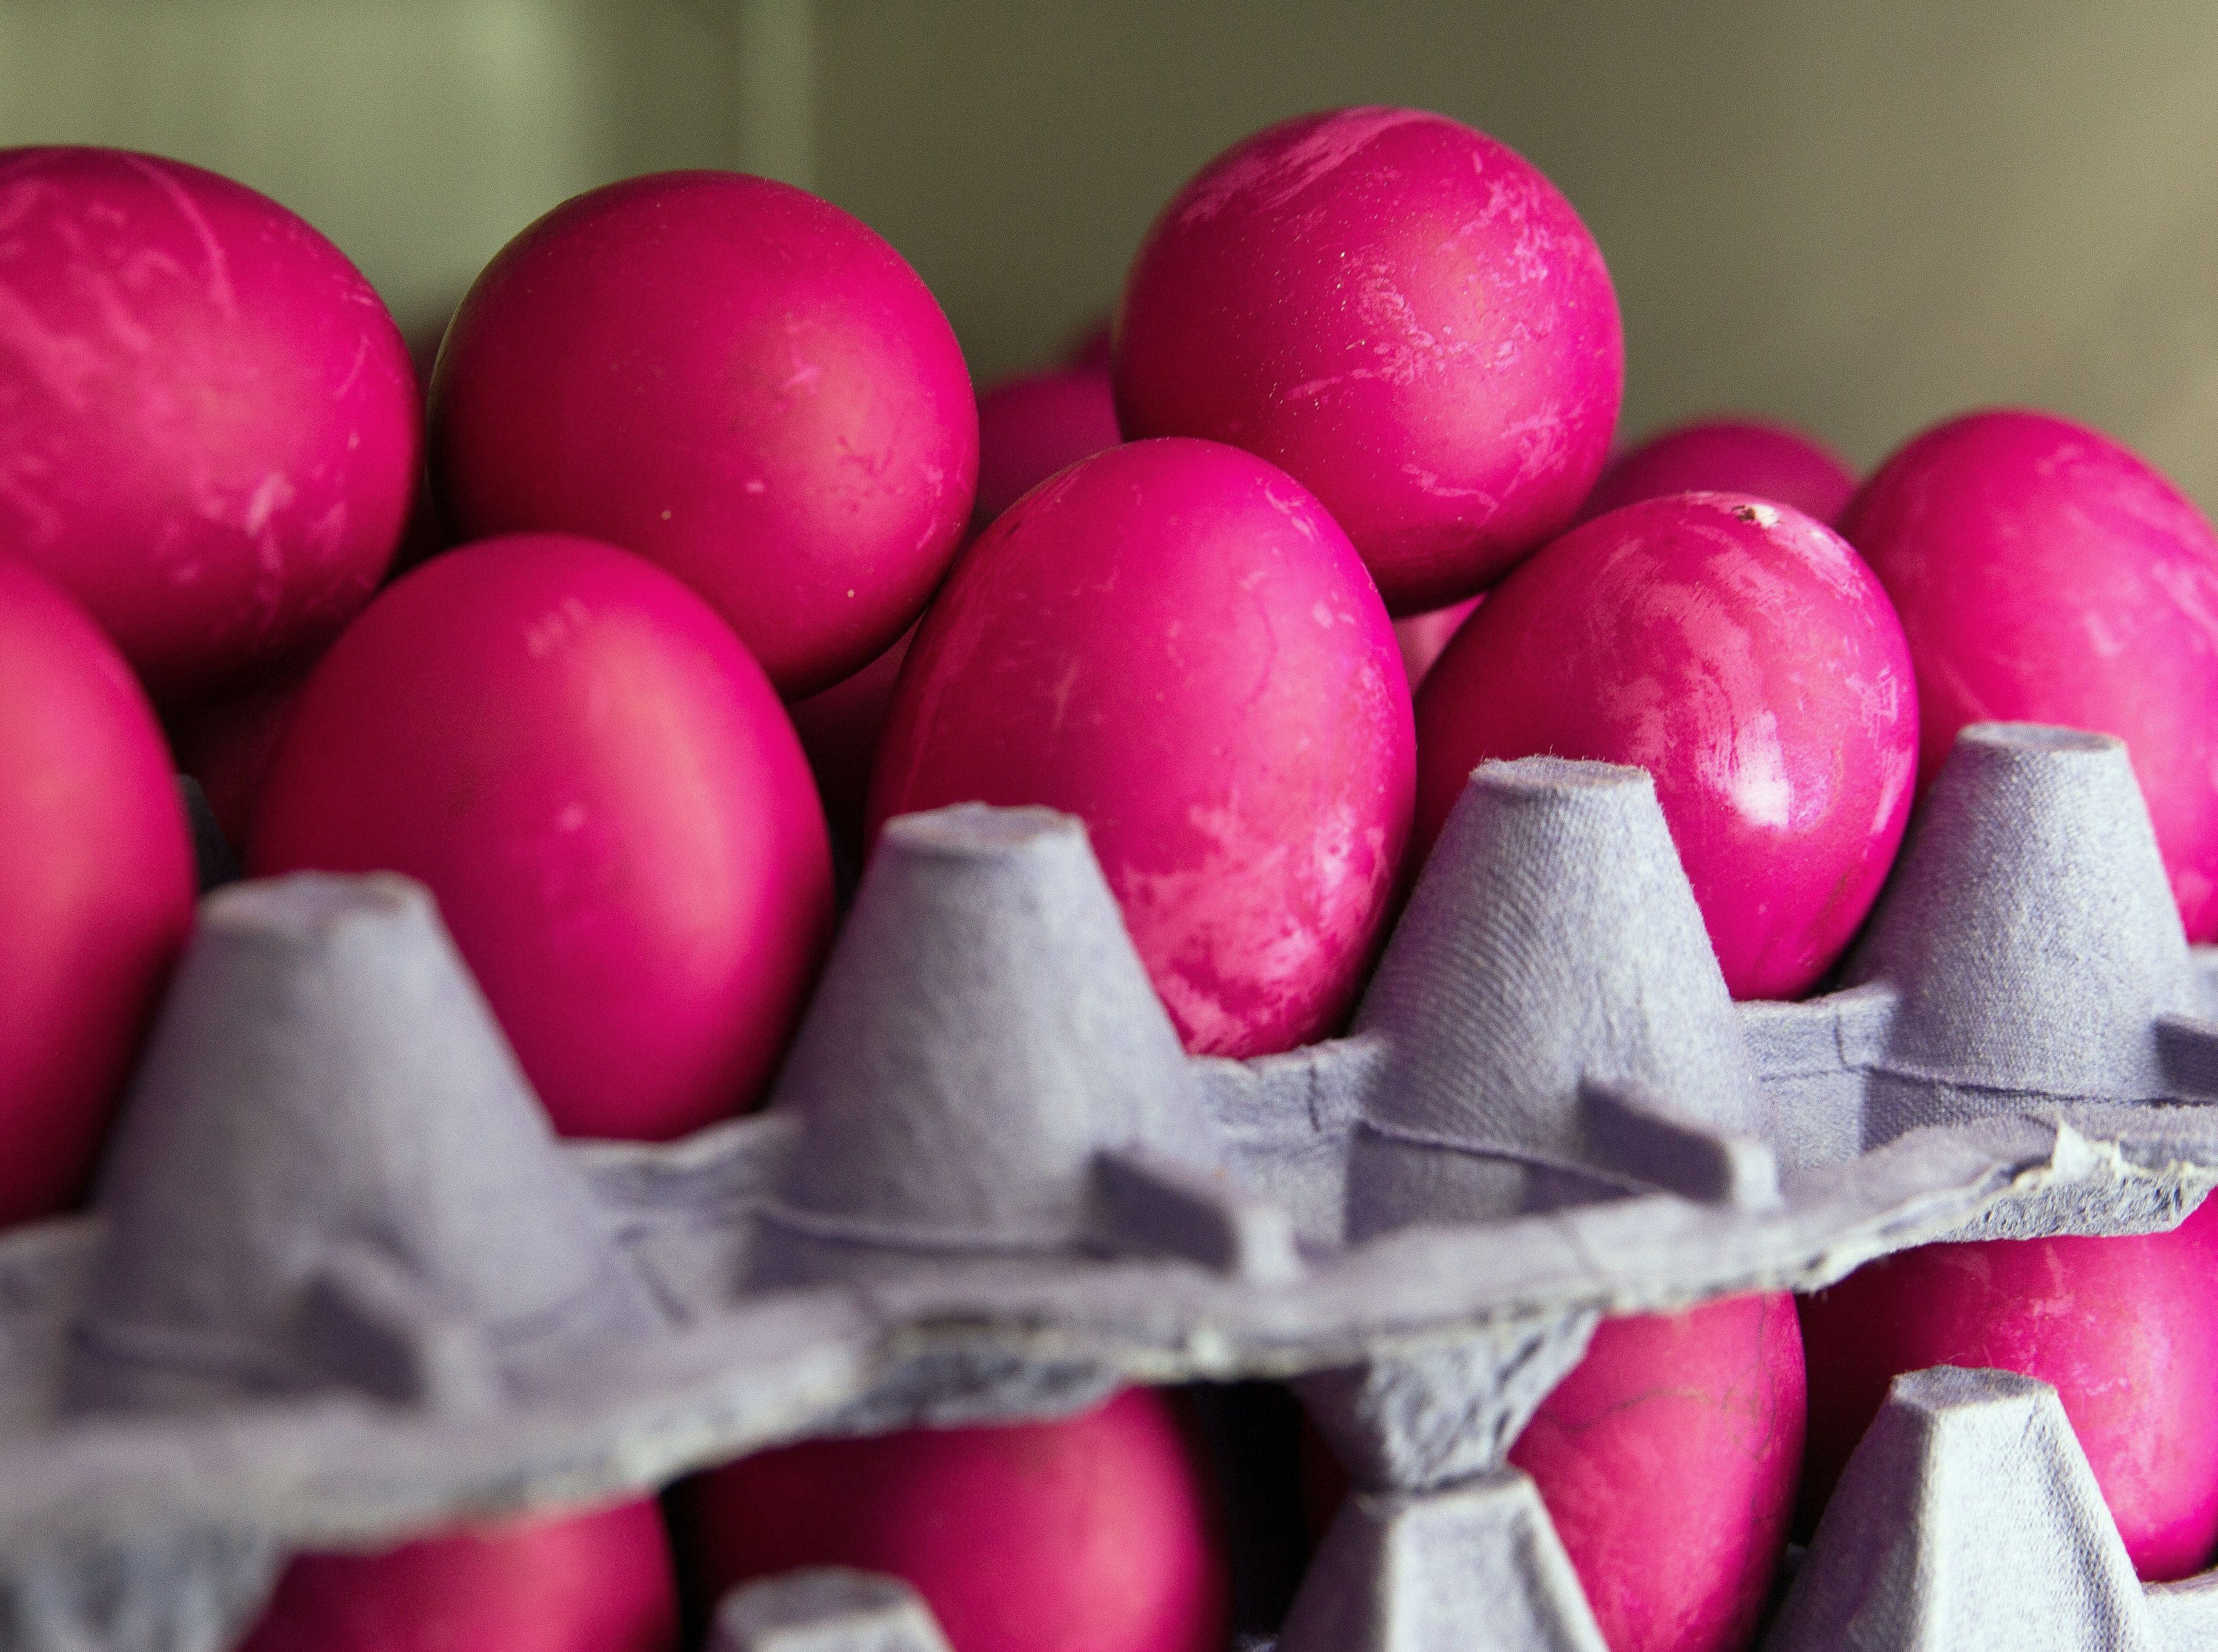 A stack of Easter eggs that have been dyed pink.